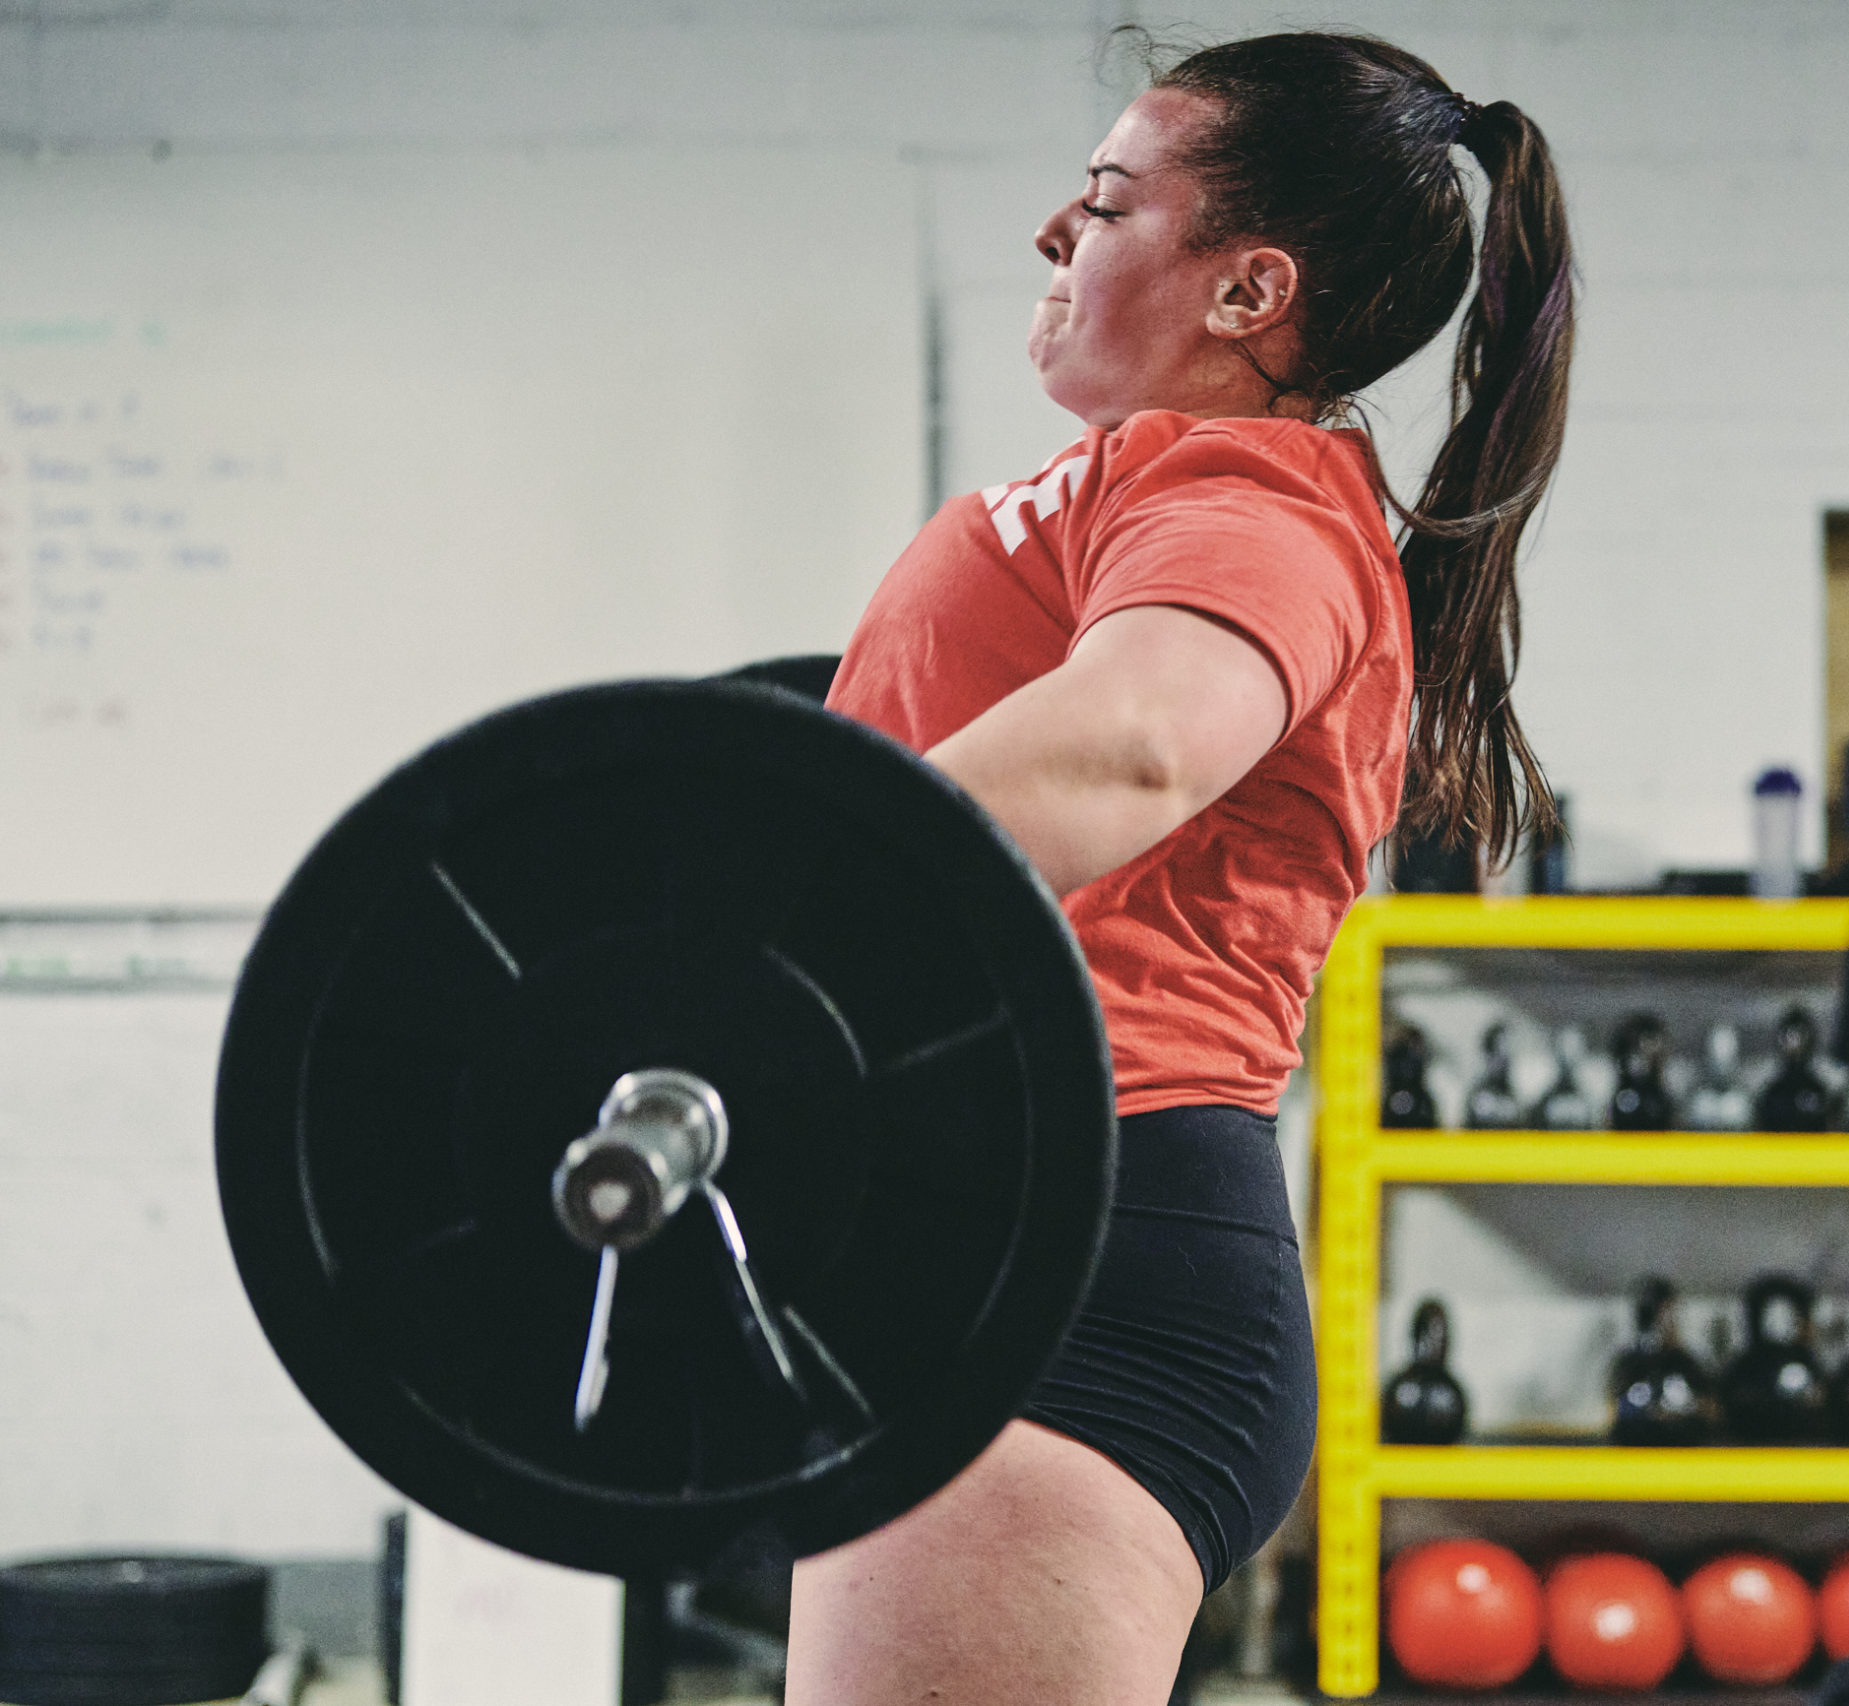 A woman is lifting a barbell in the gym.